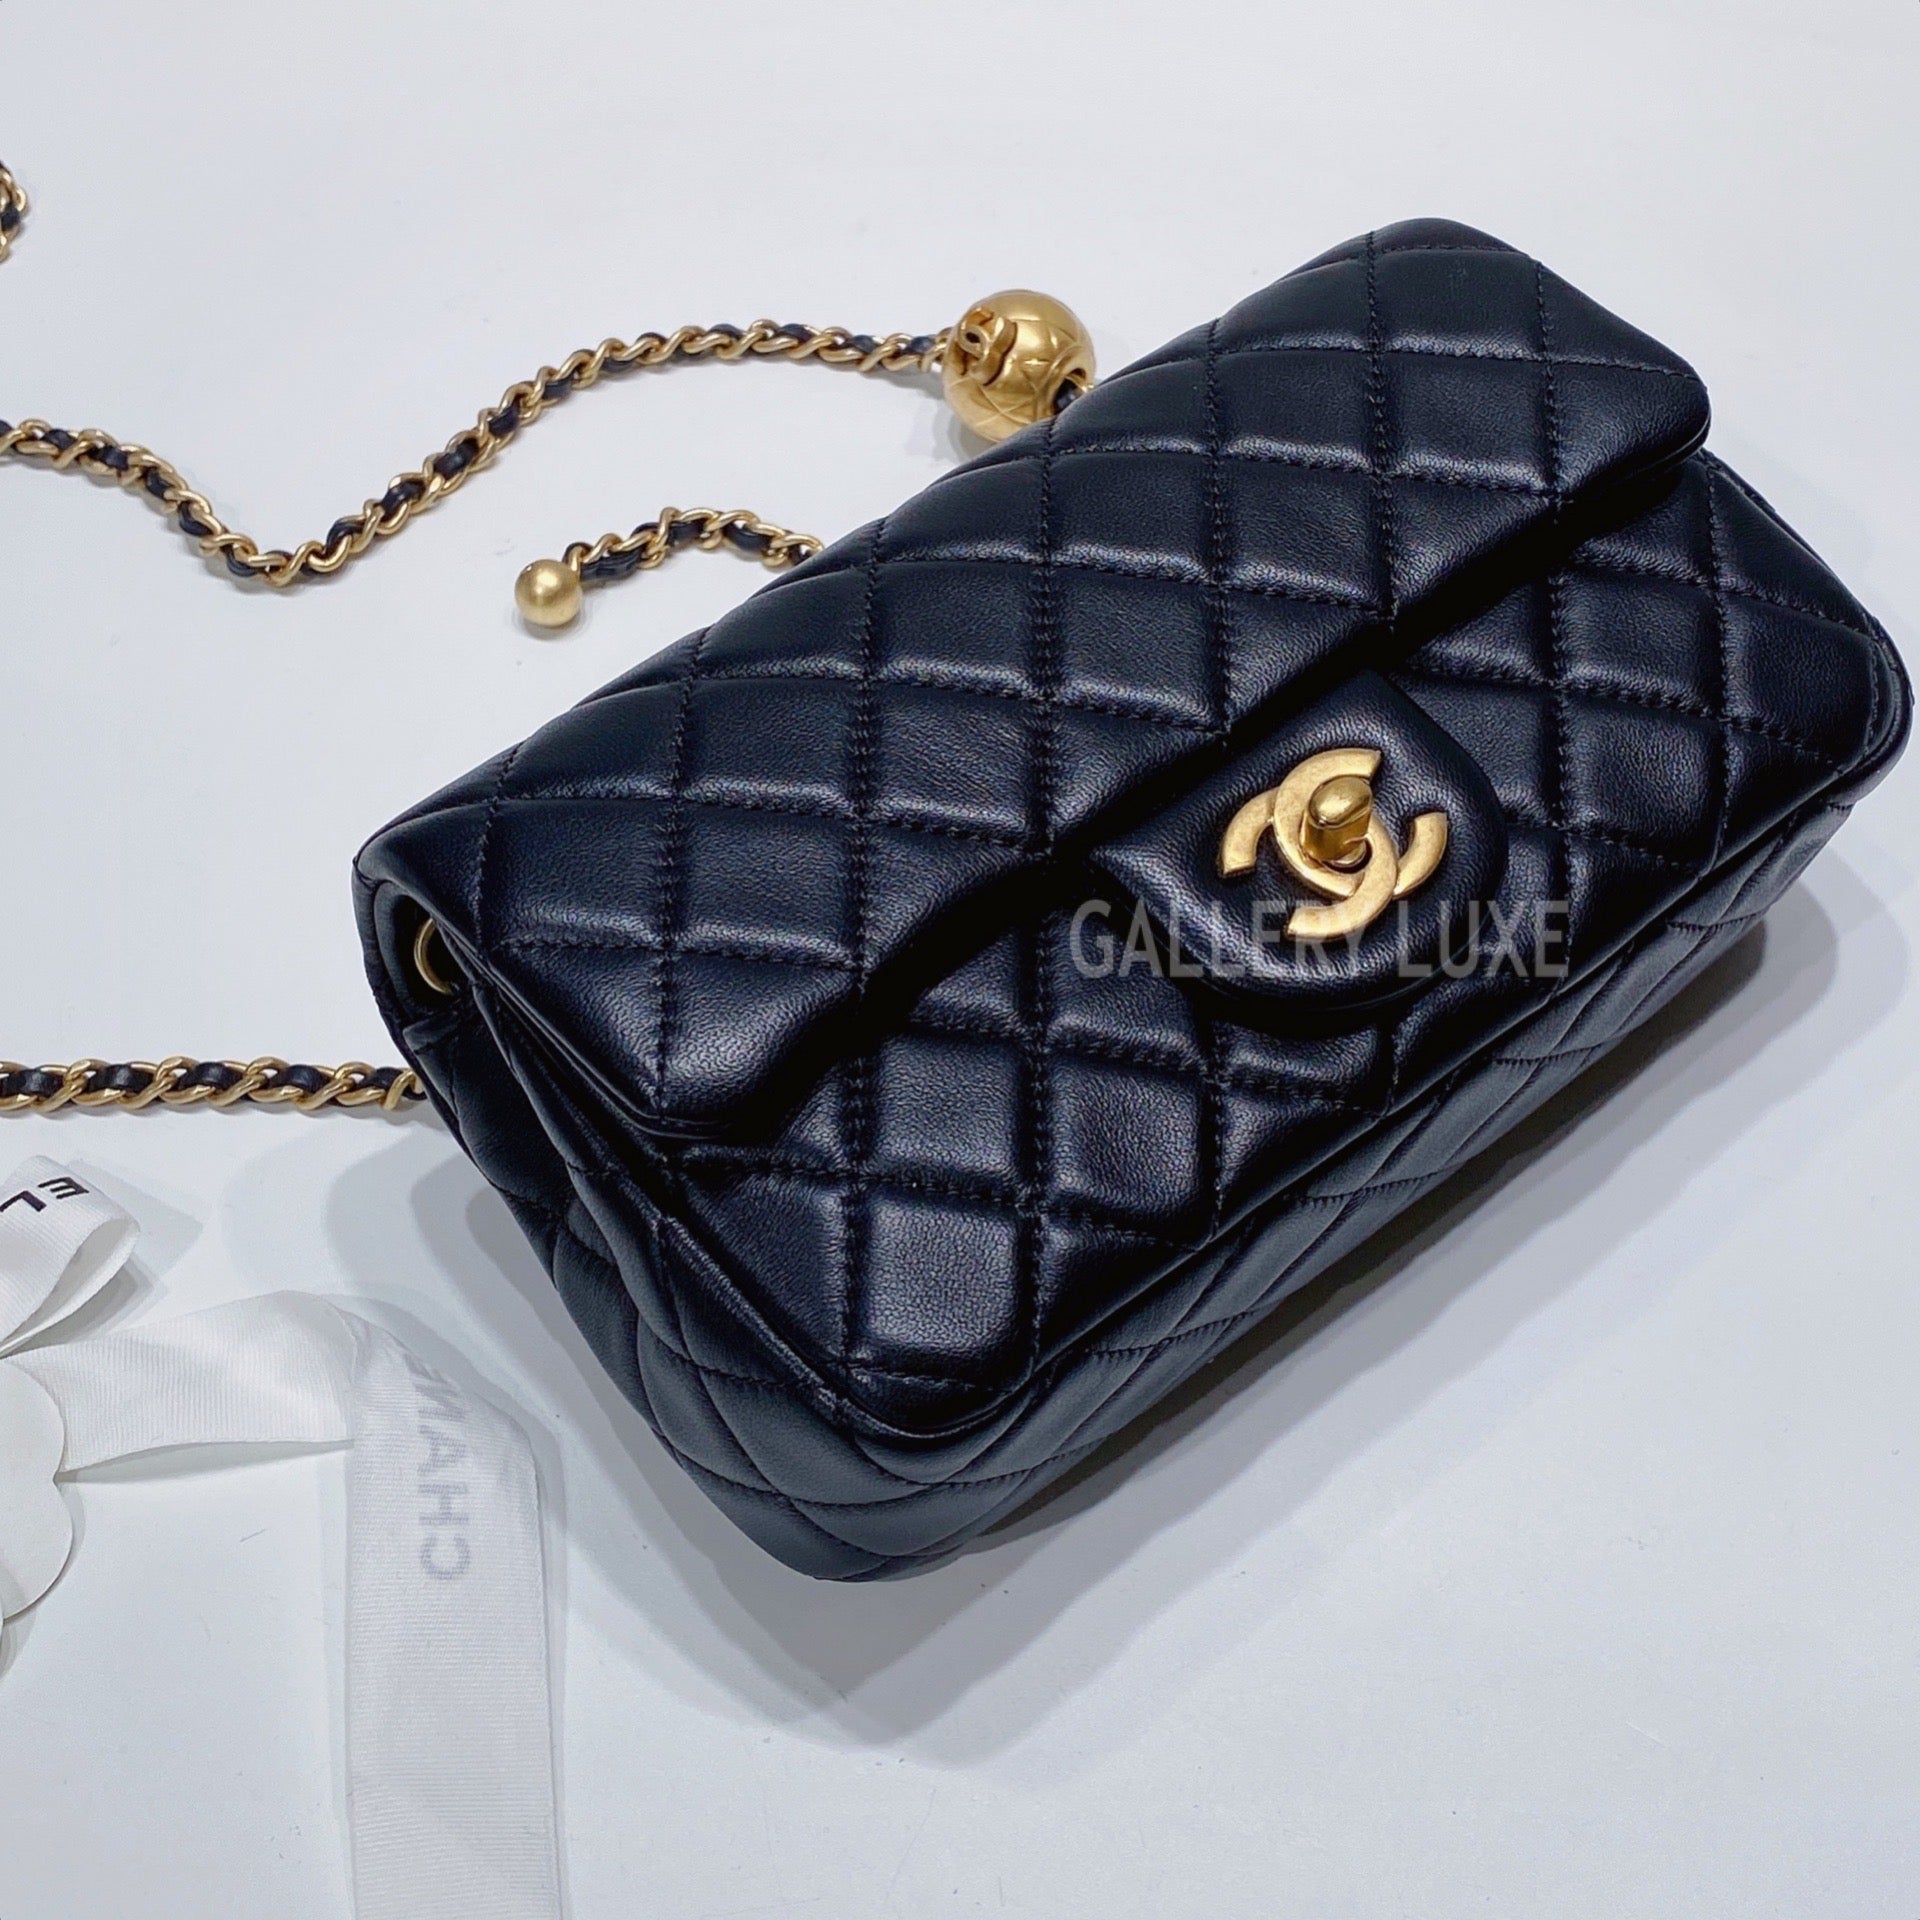 1,000+ affordable chanel top handle mini For Sale